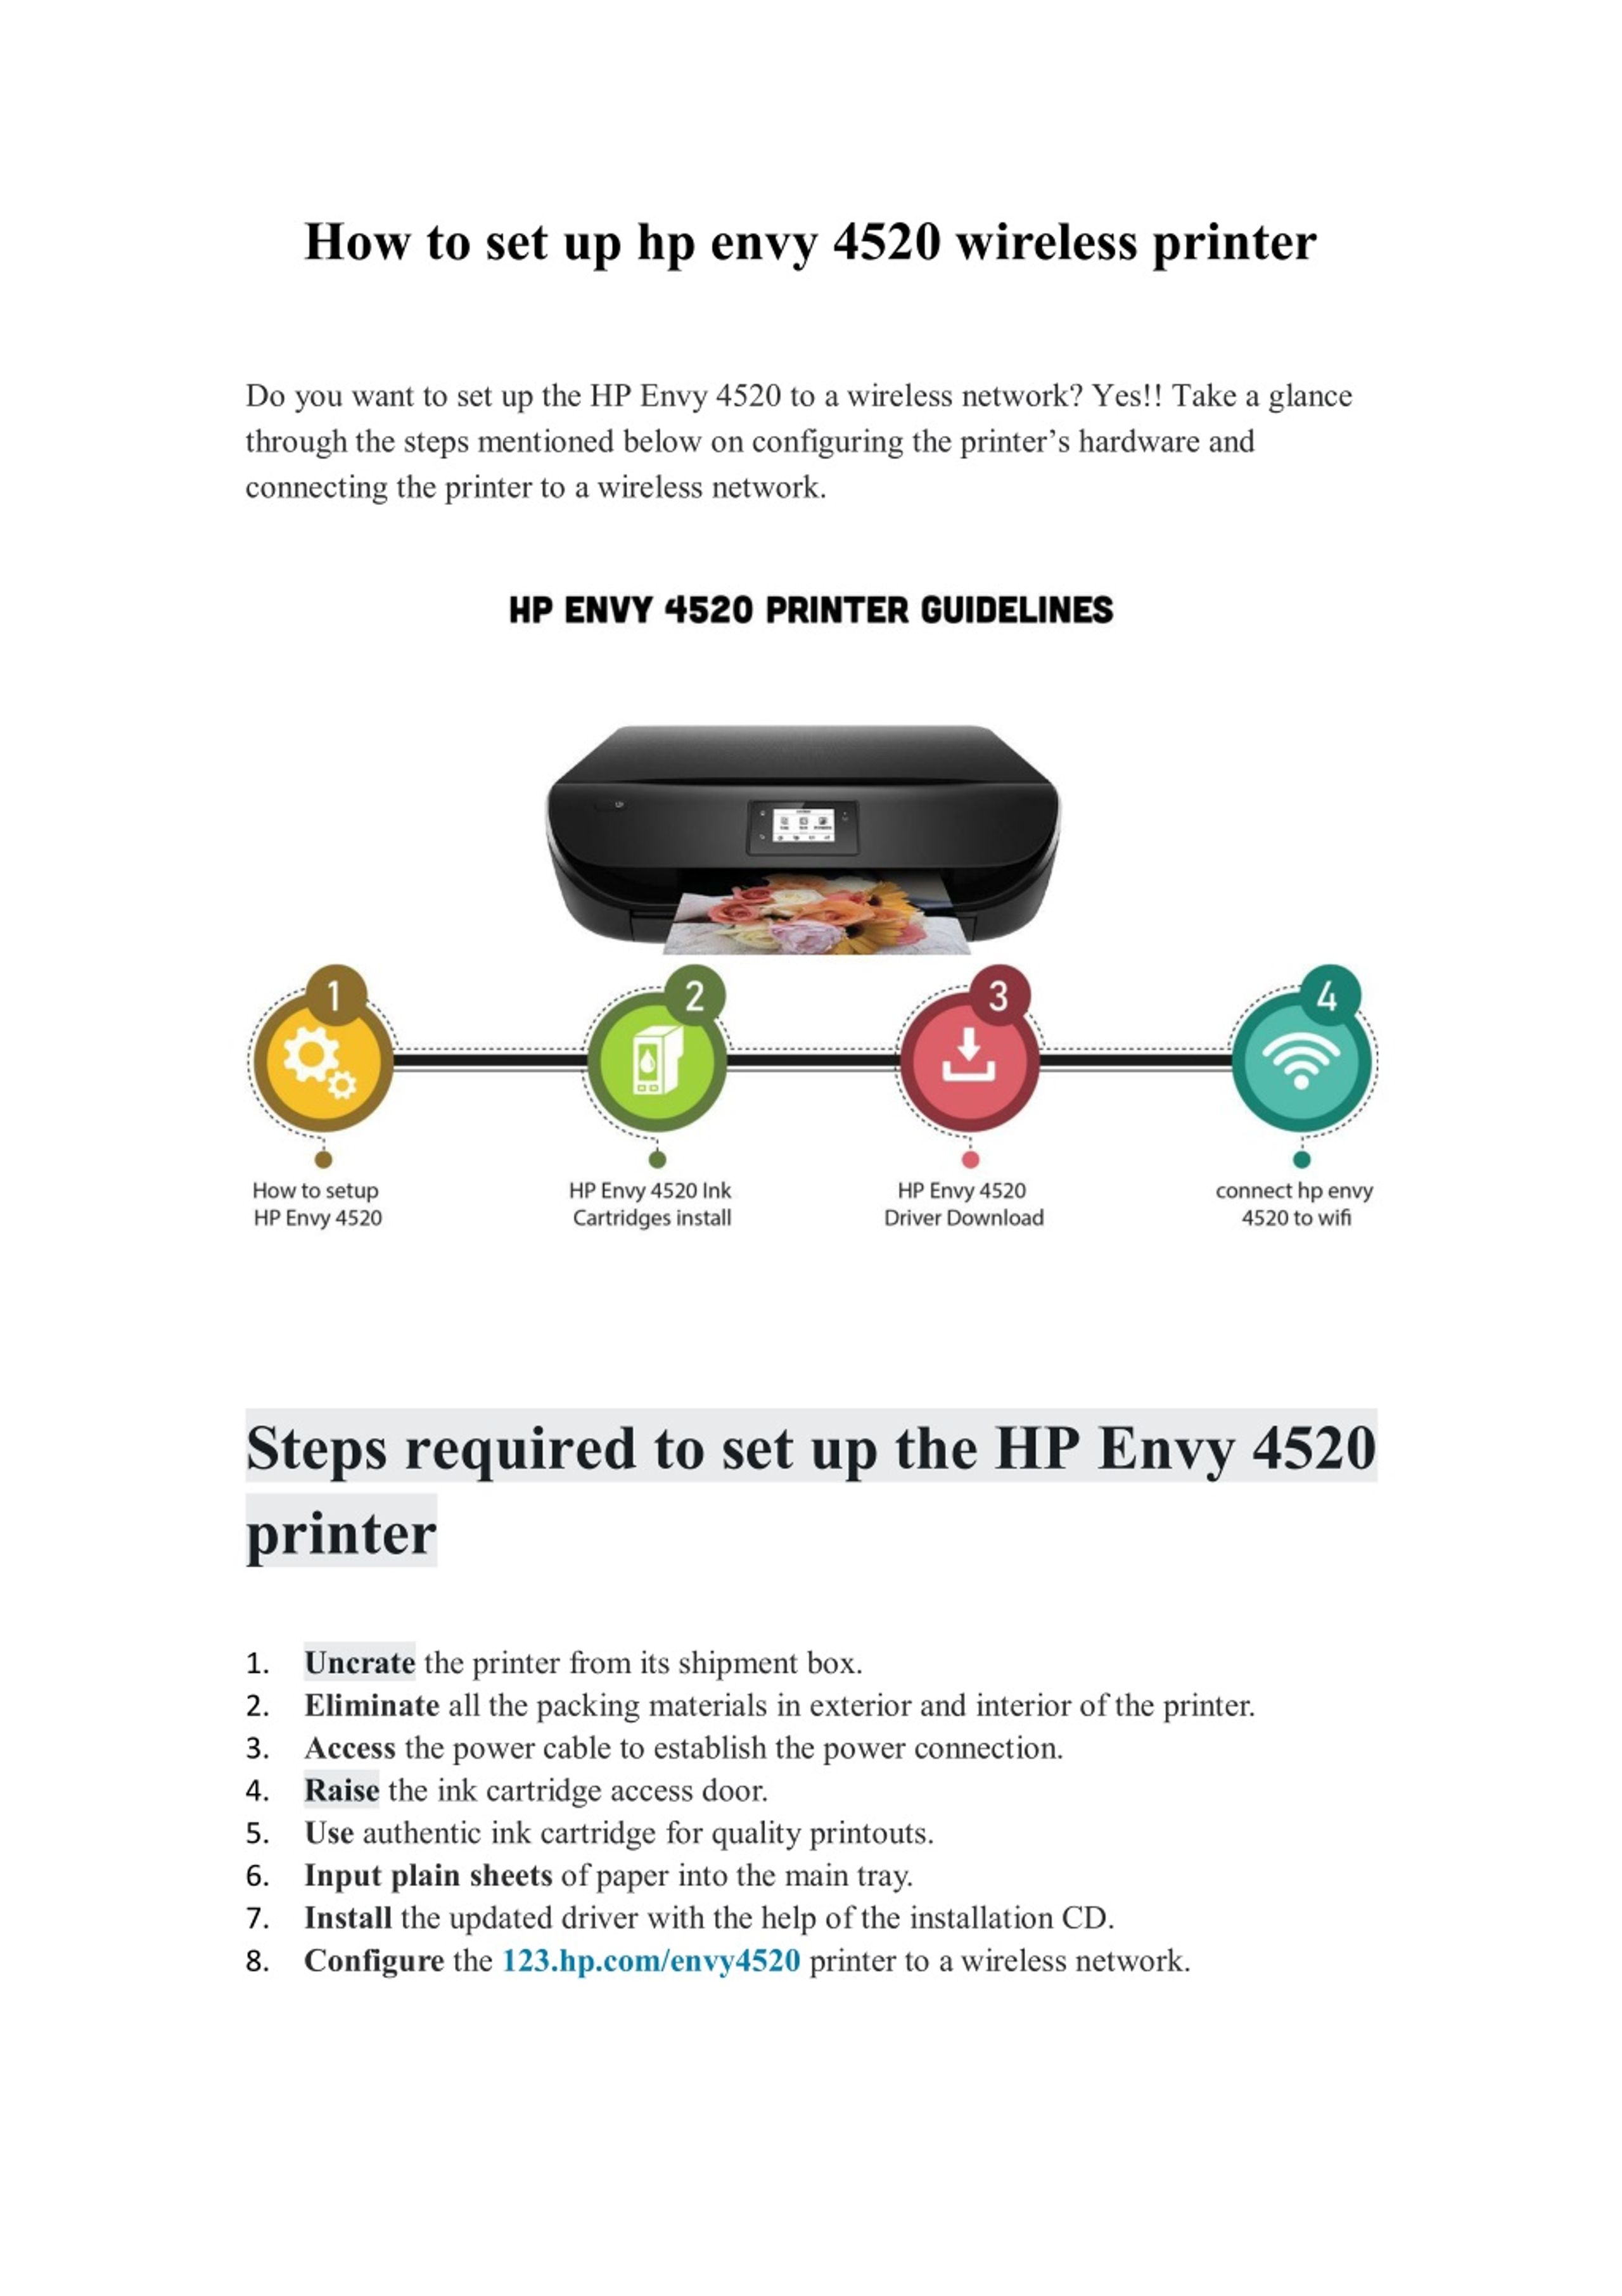 Ppt How To Setup Hp Envy 4520 Wireless Printer Solutions Powerpoint Presentation Id8163693 7408